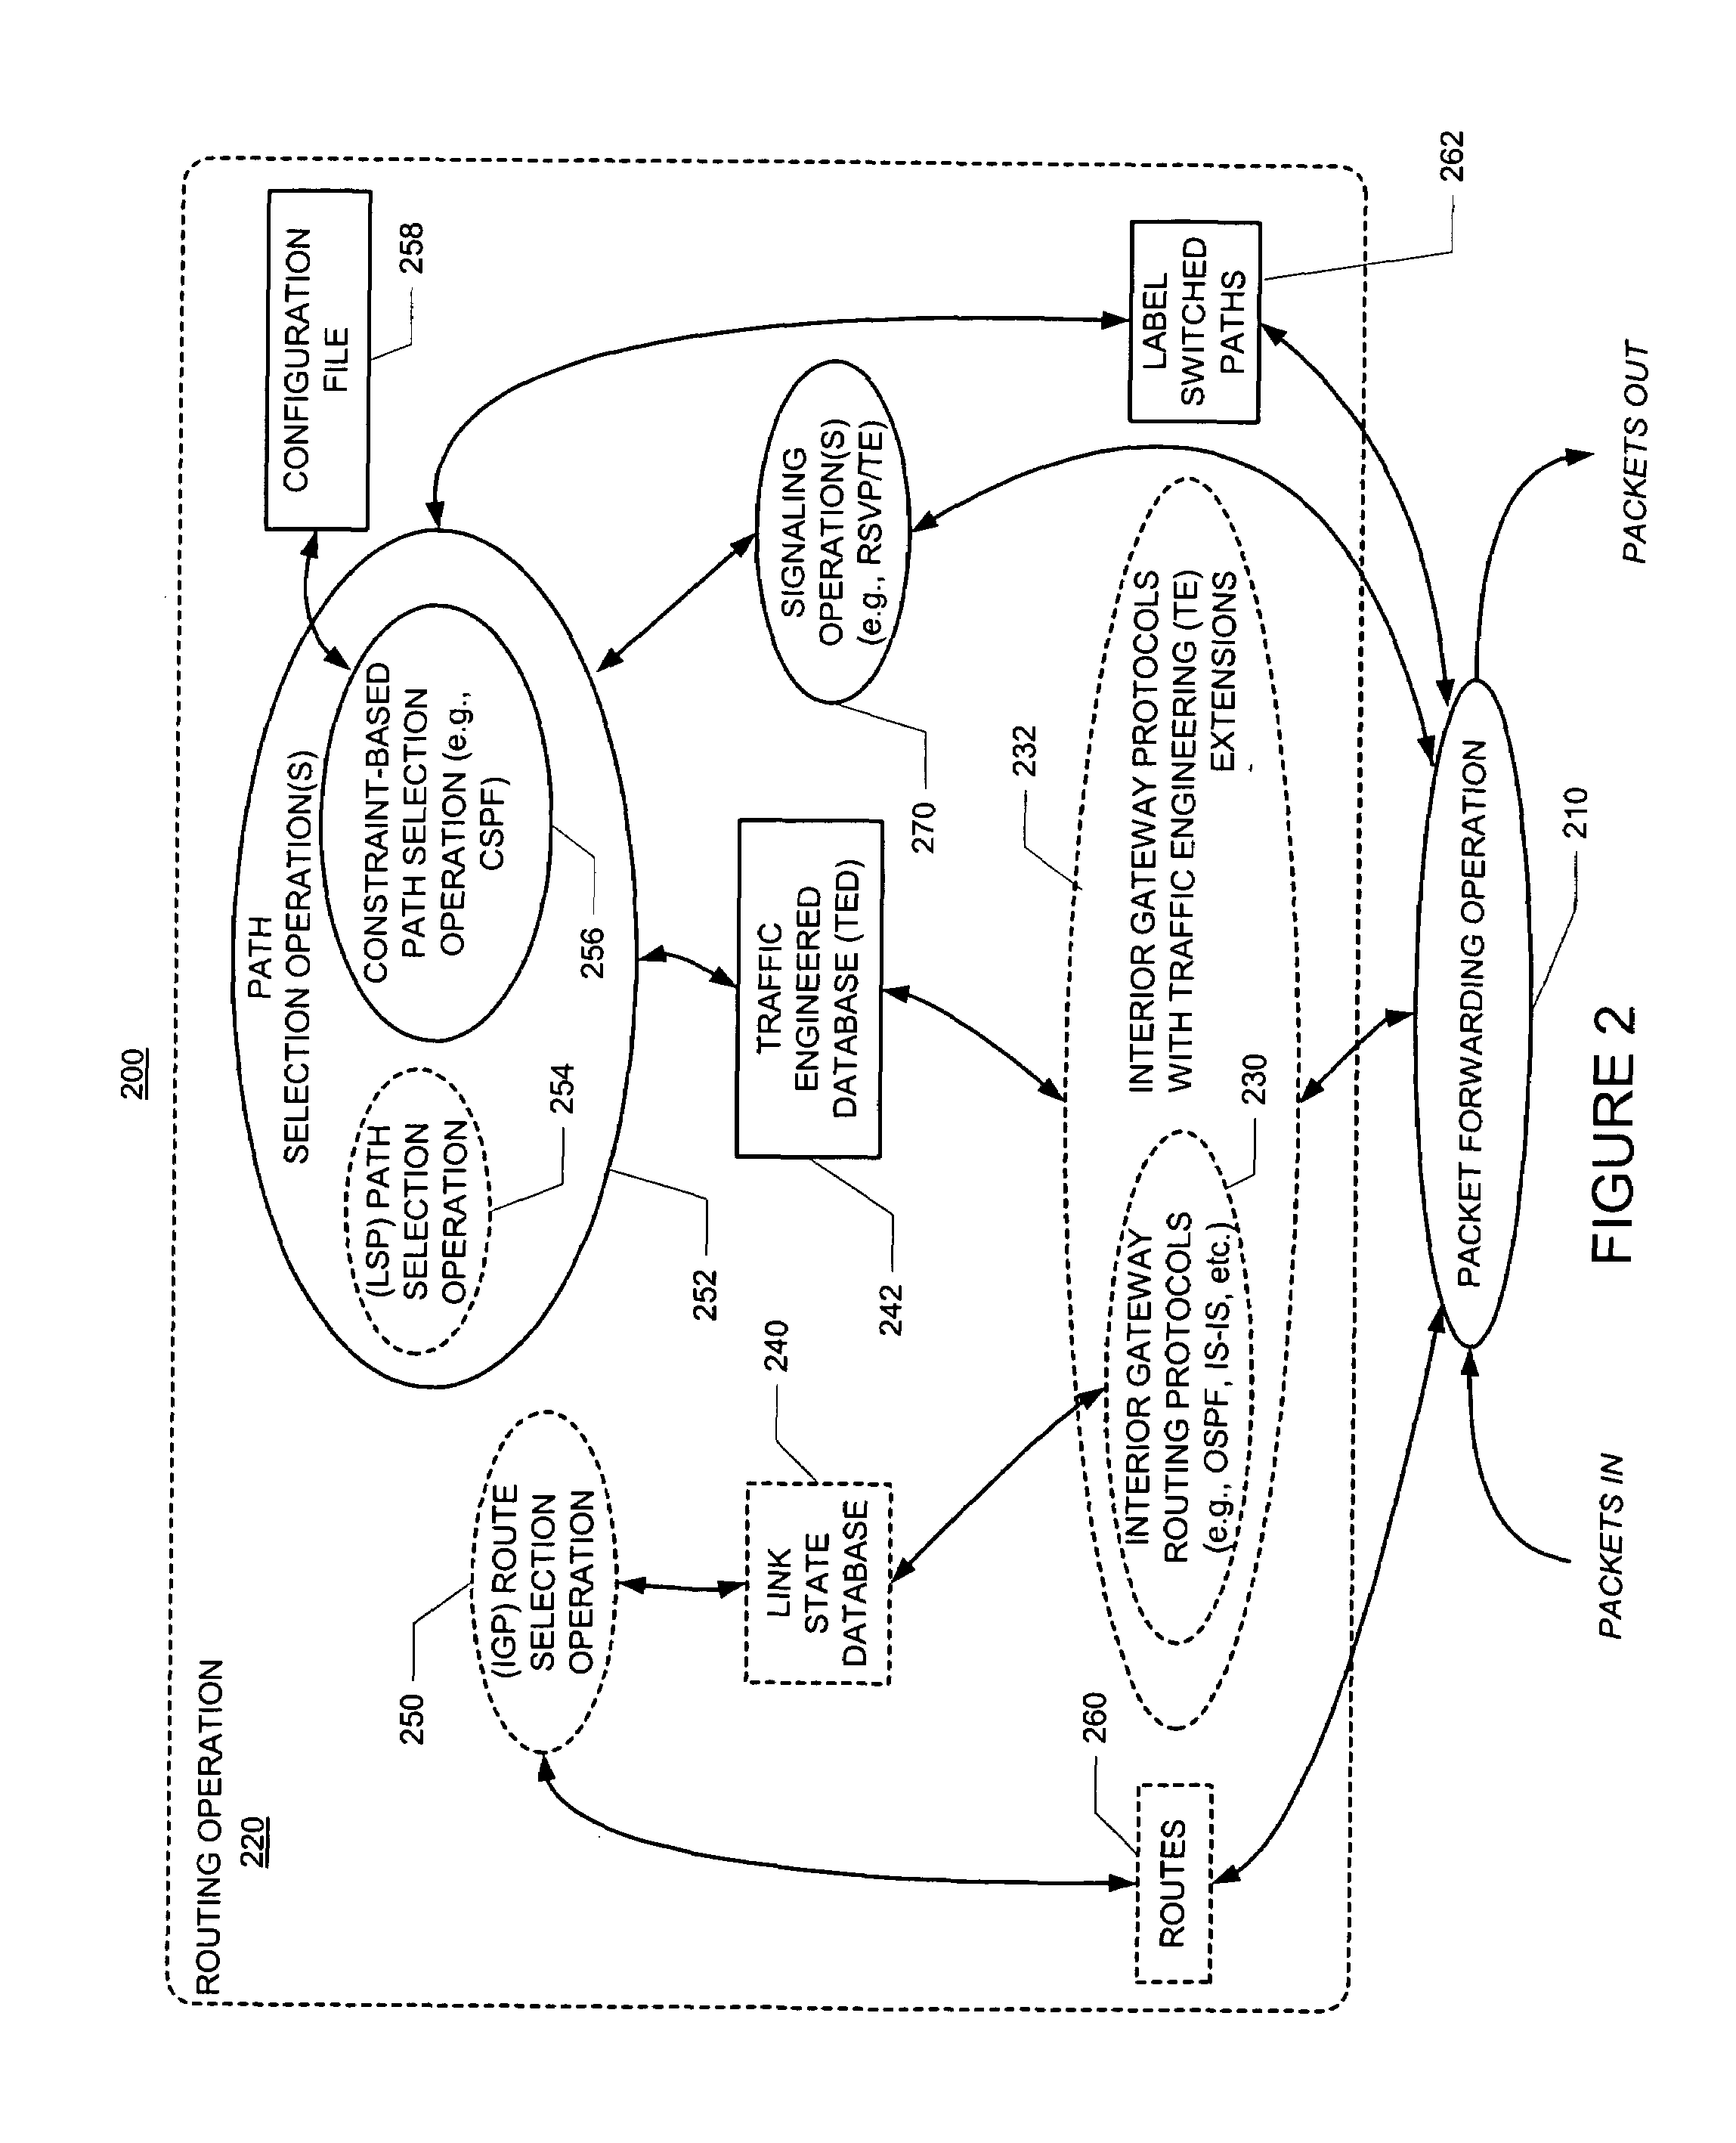 Communicating constraint information for determining a path subject to such constraints